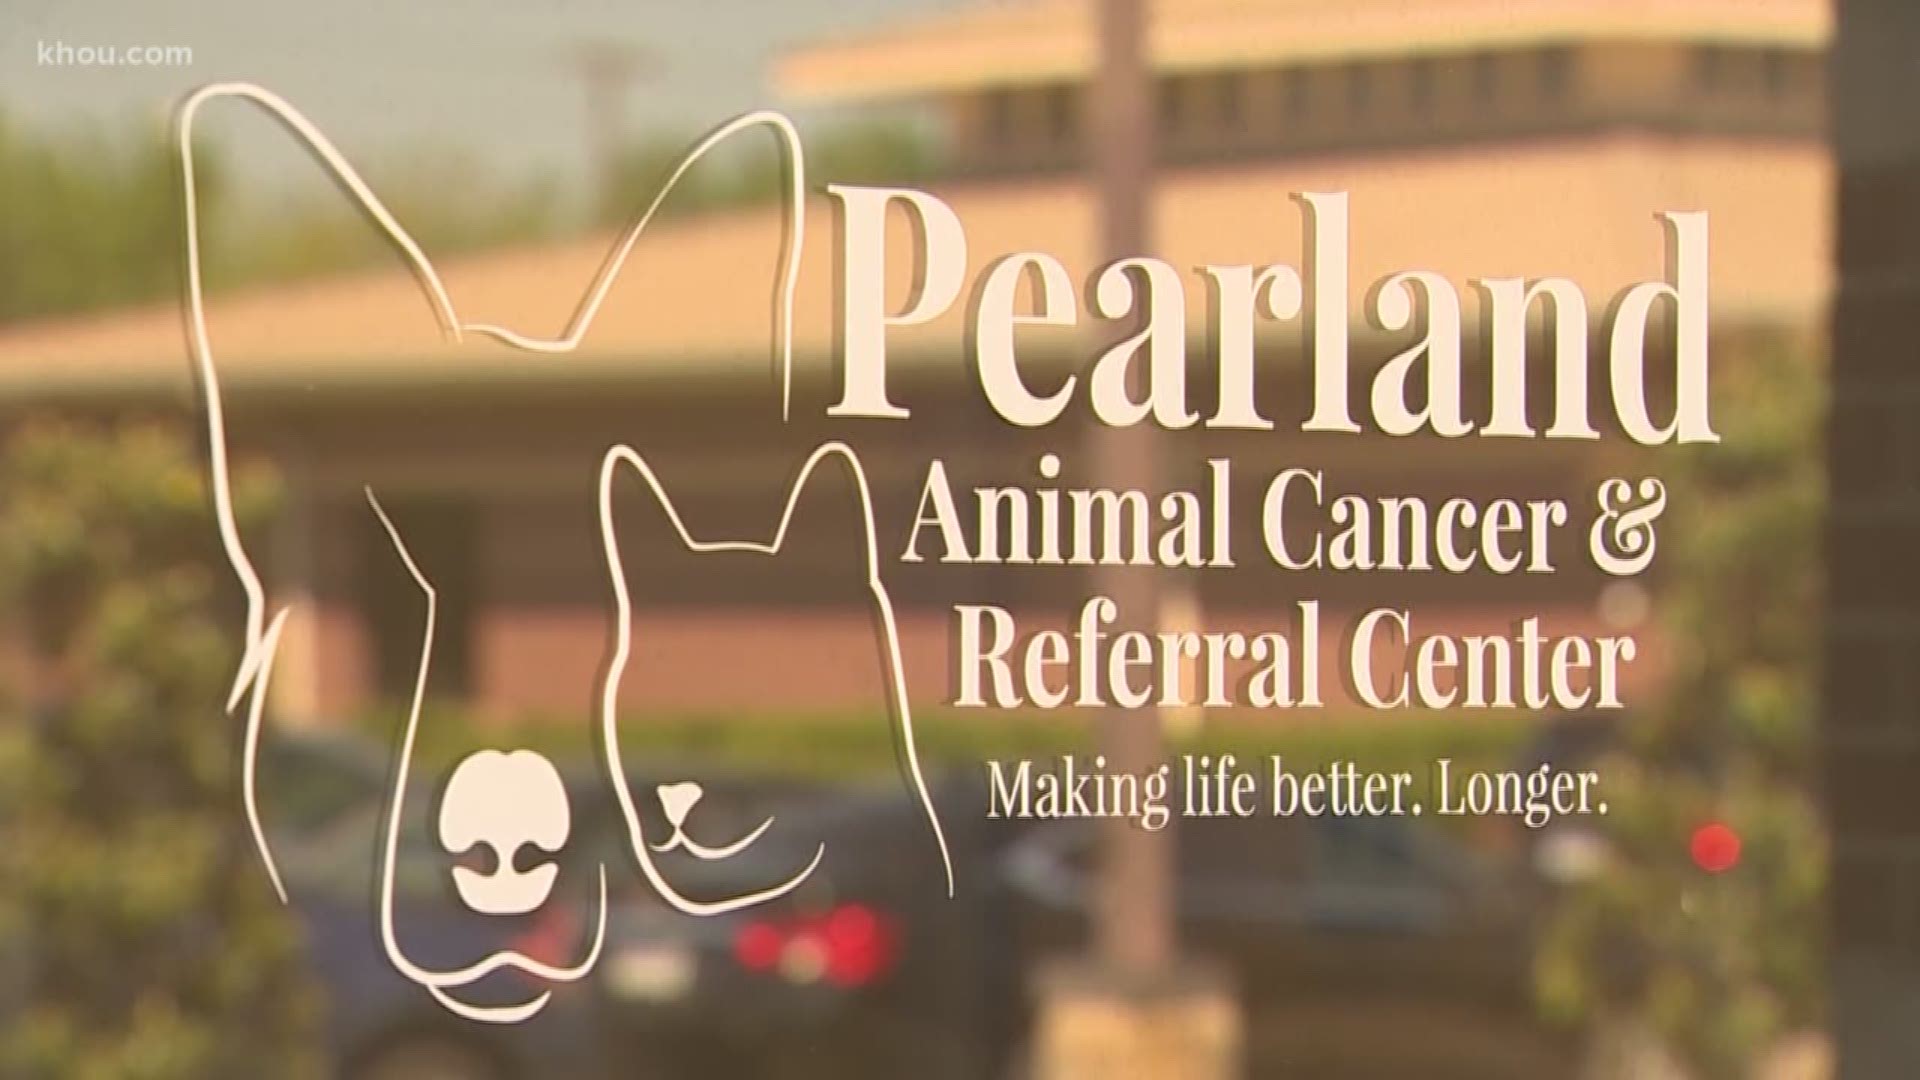 New cancer center for pets opens in Pearland 